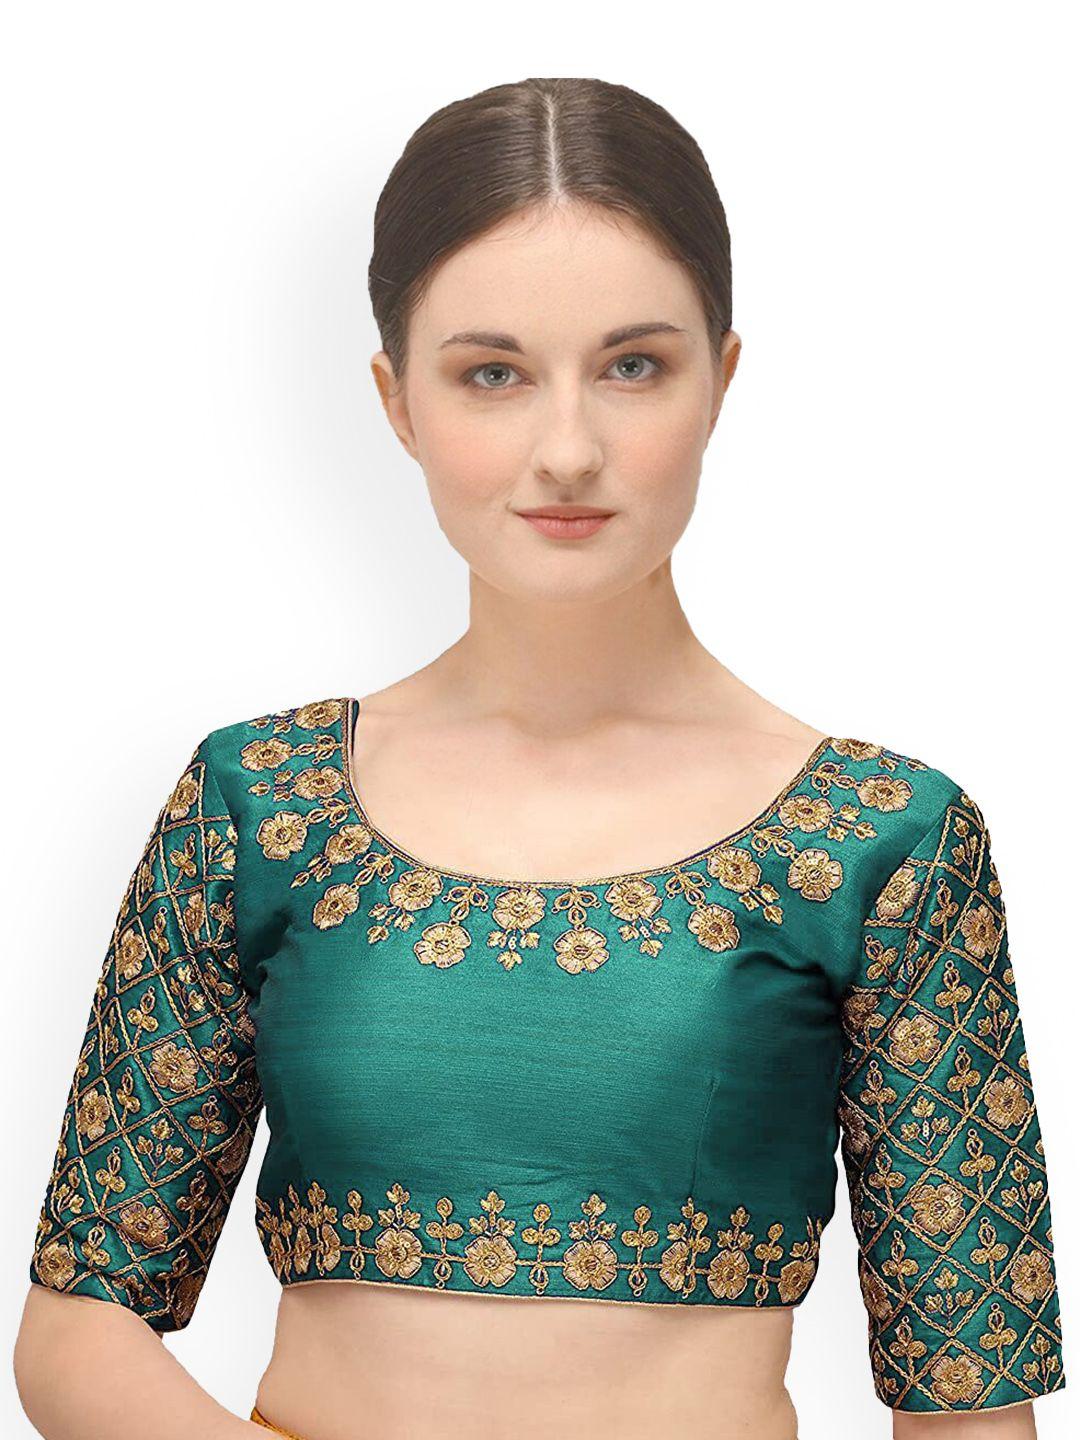 sumaira tex teal green & gold-coloured embroidered saree blouse